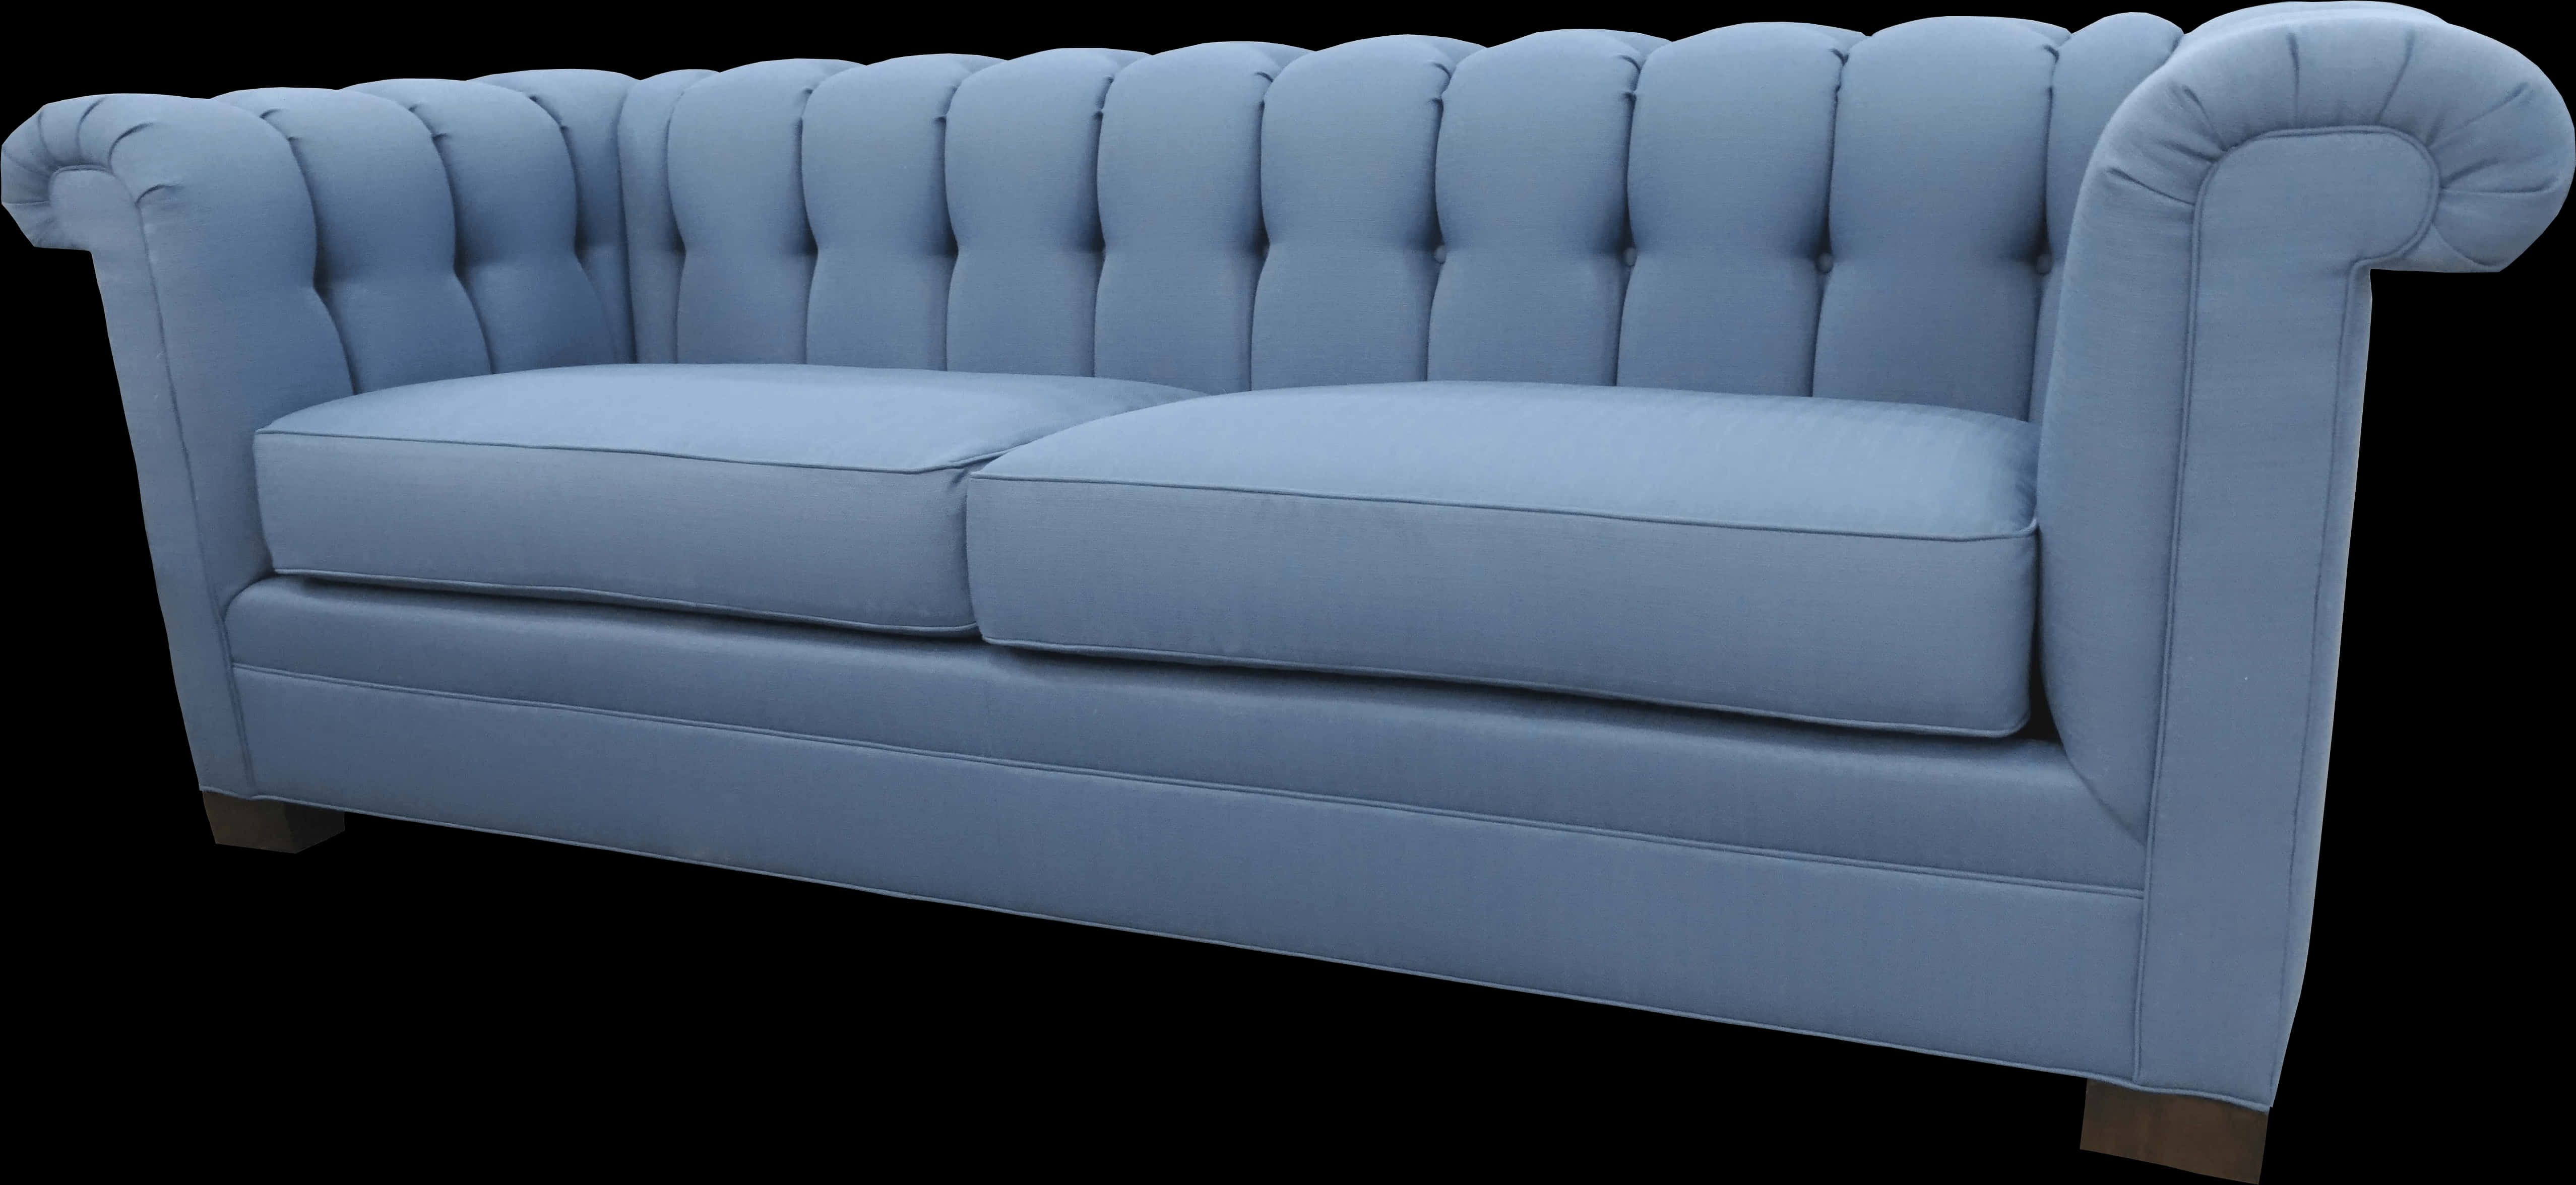 Blue Tufted Chesterfield Sofa